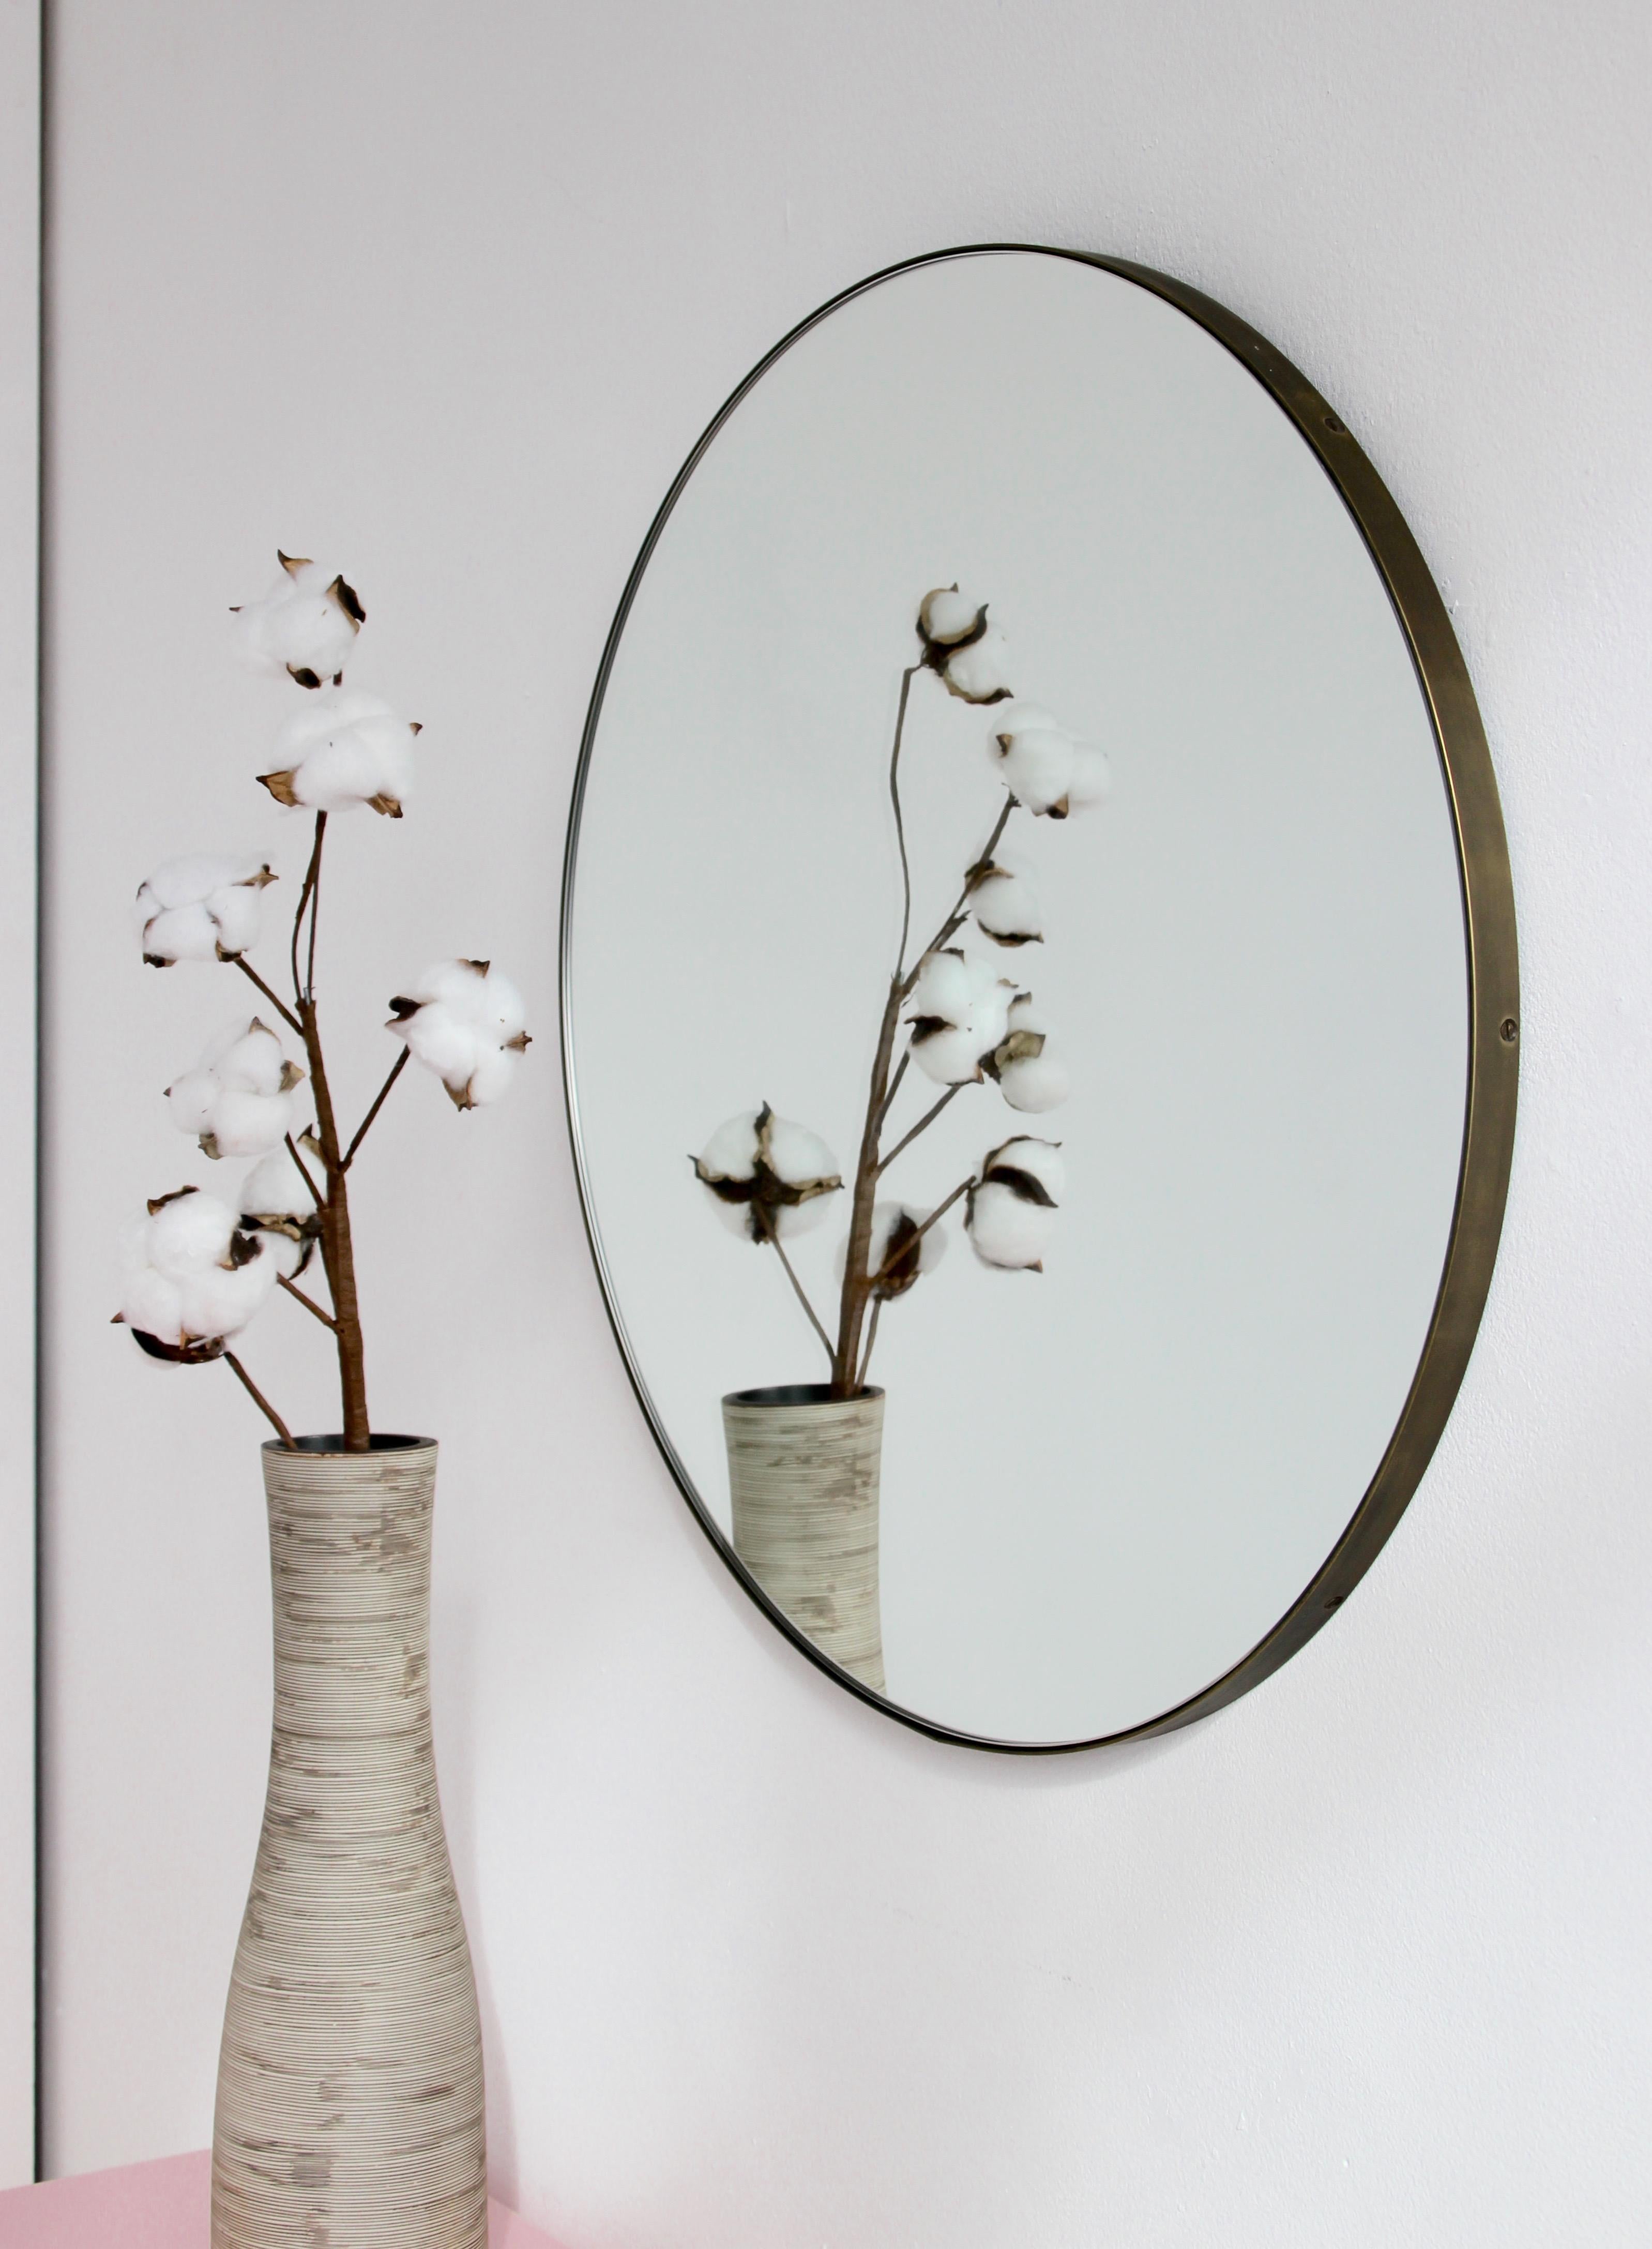 Minimalist Orbis™ round mirror with a solid brass frame with a bronze patina finish. Designed and handcrafted in London, UK.

The detailing and finish, including visible brass screws, emphasise the crafty and quality feel of the mirror, a true